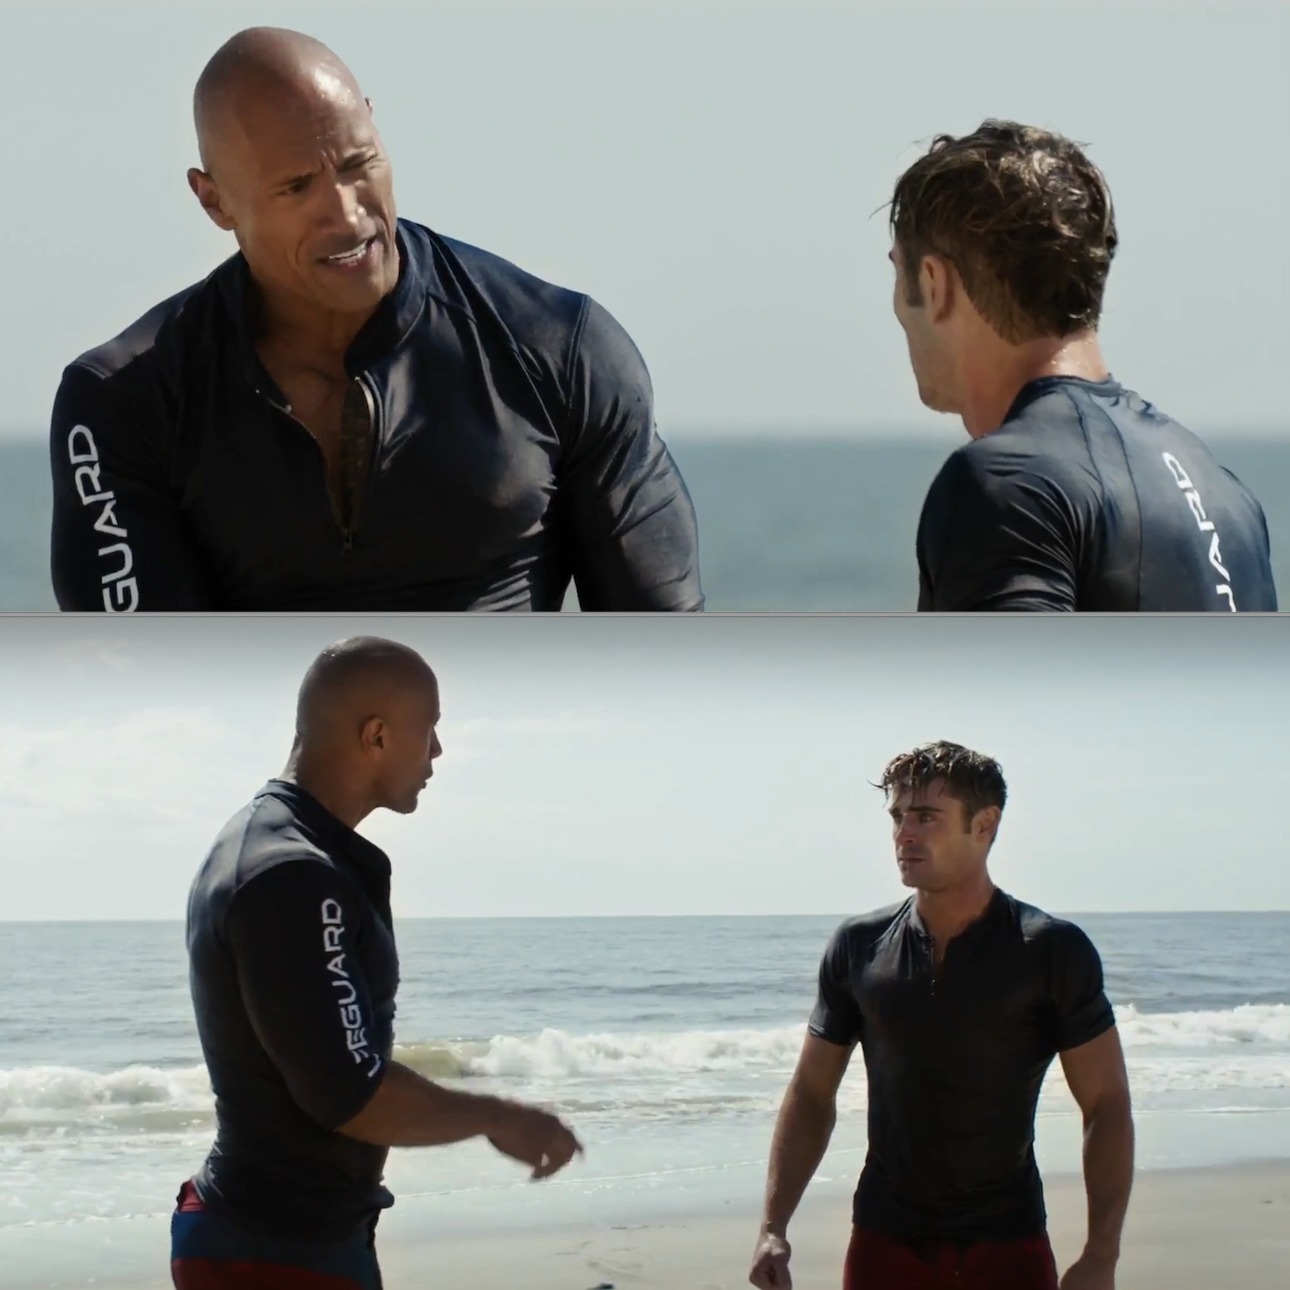 The Rock and Zac Efron standing next to each other at the beach